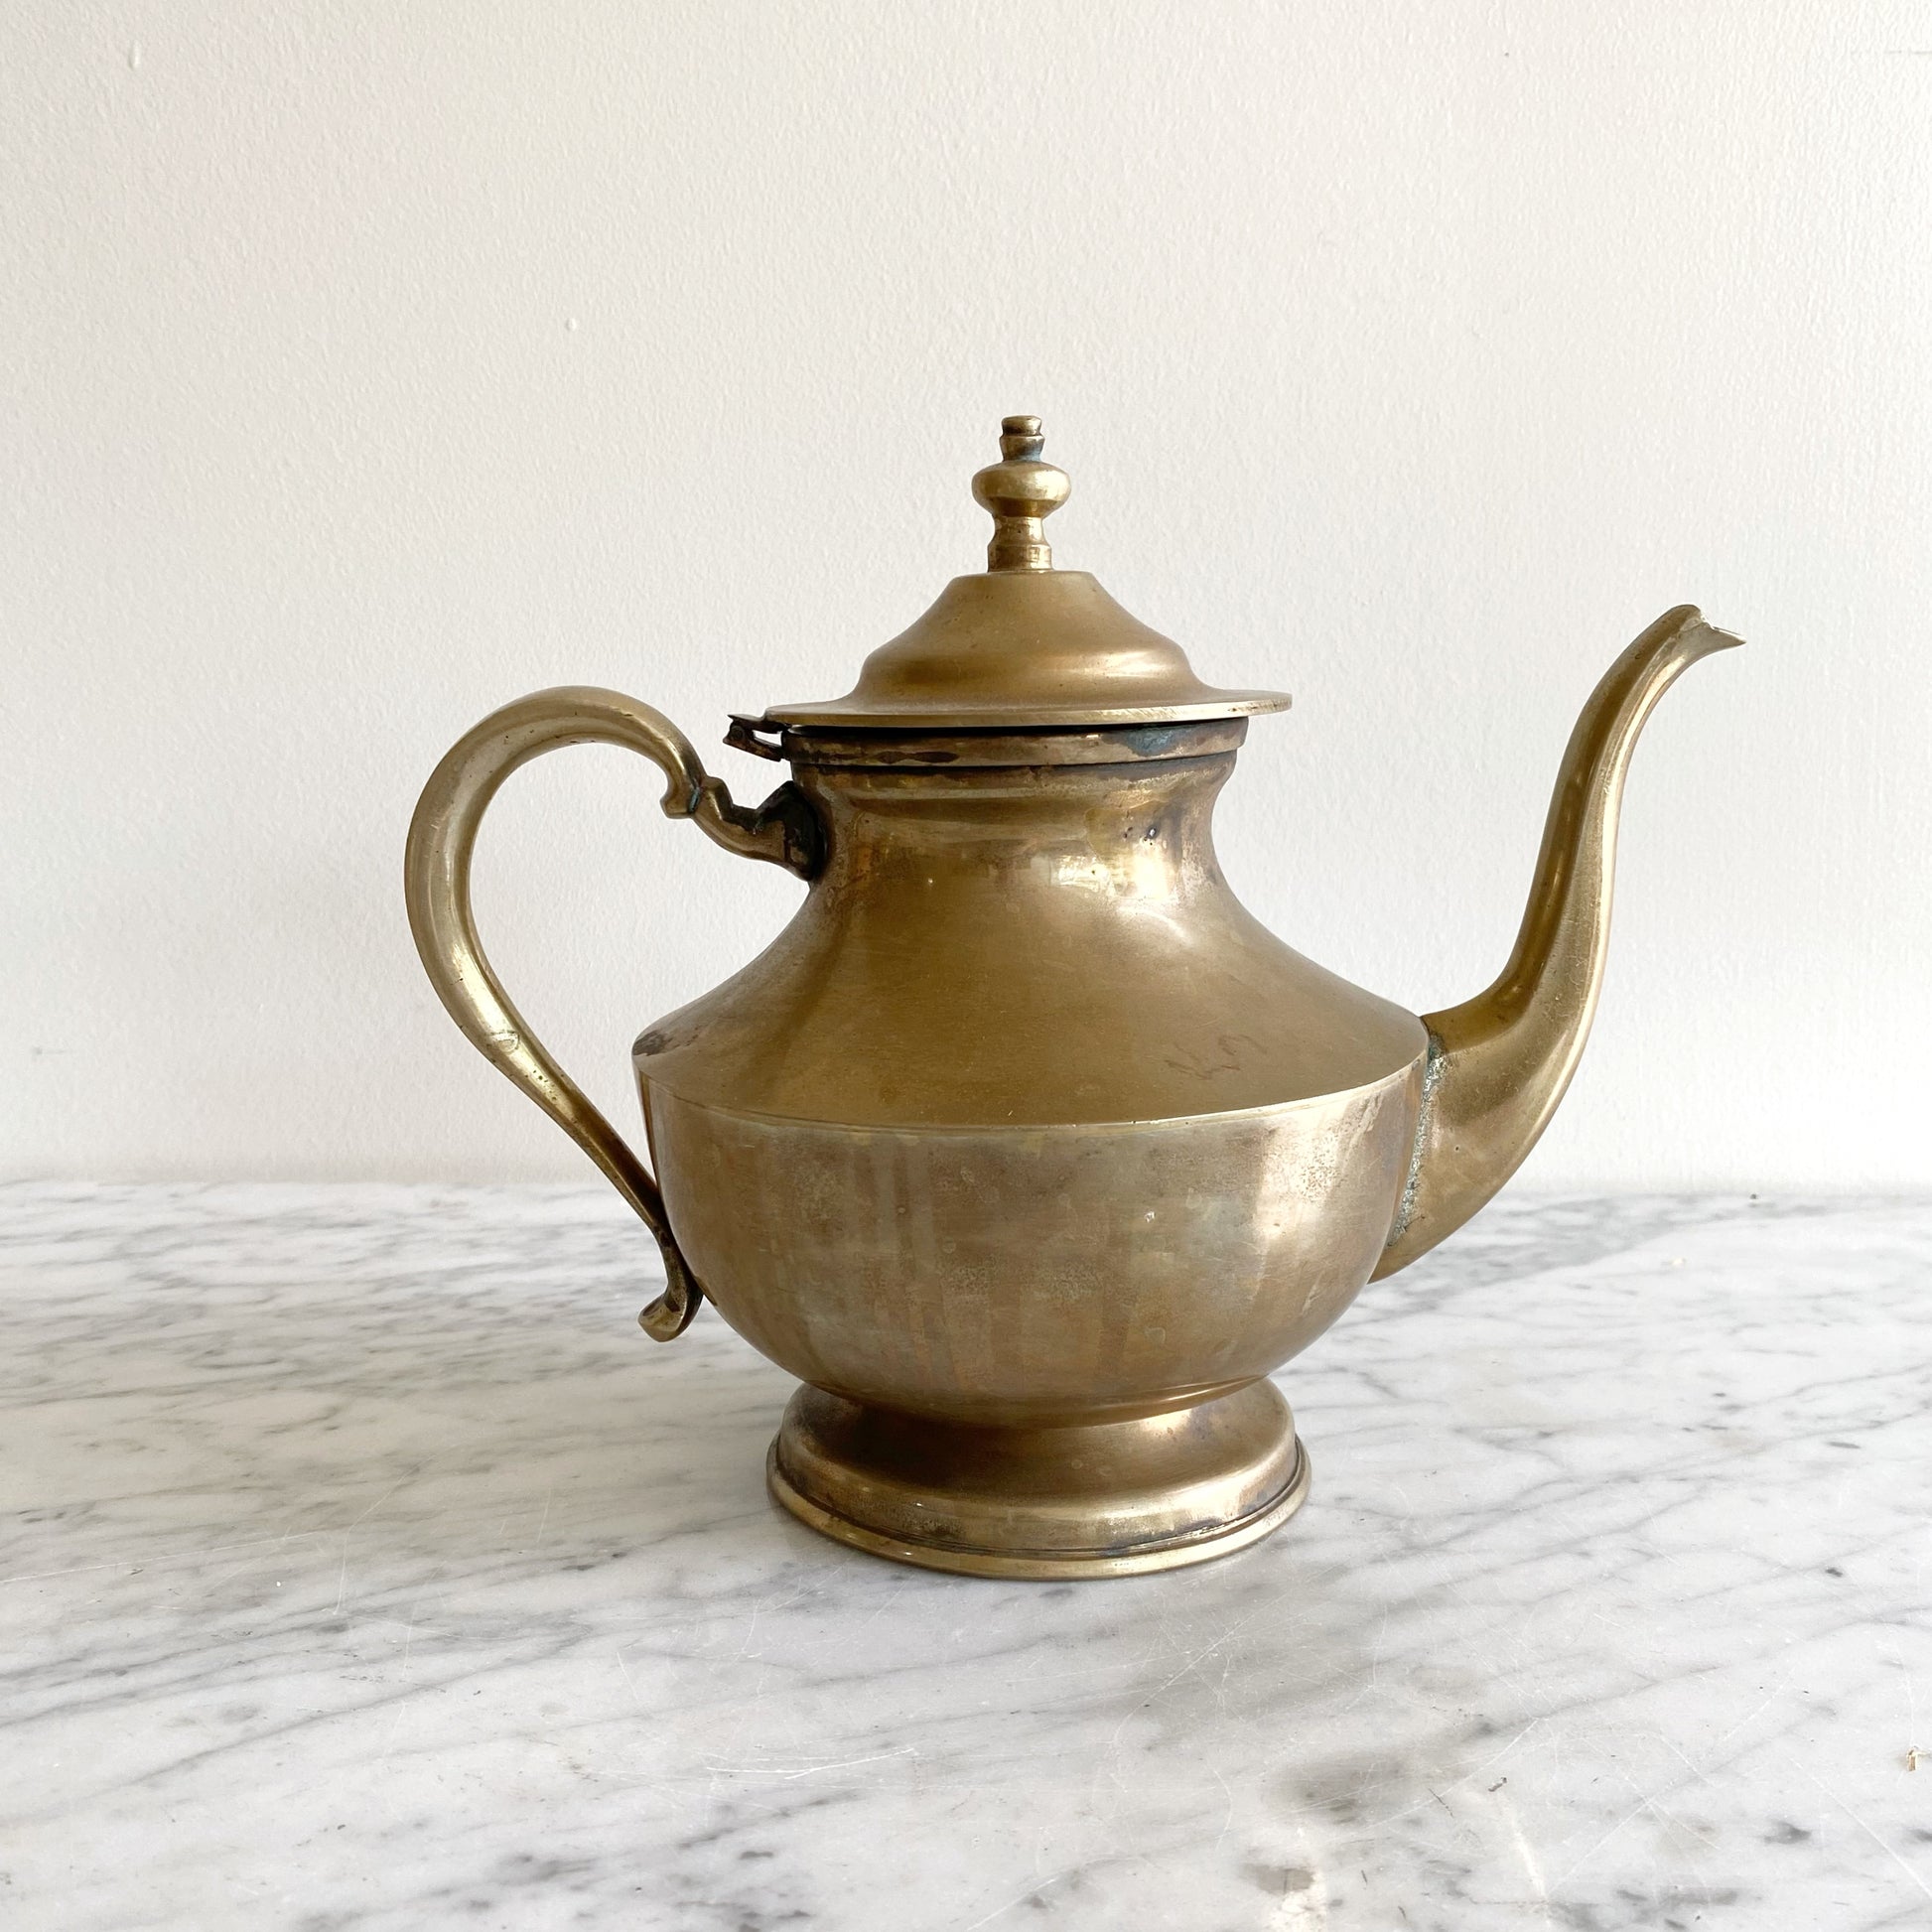 Old Brass Teapot with Porcelain Handle Stock Image - Image of